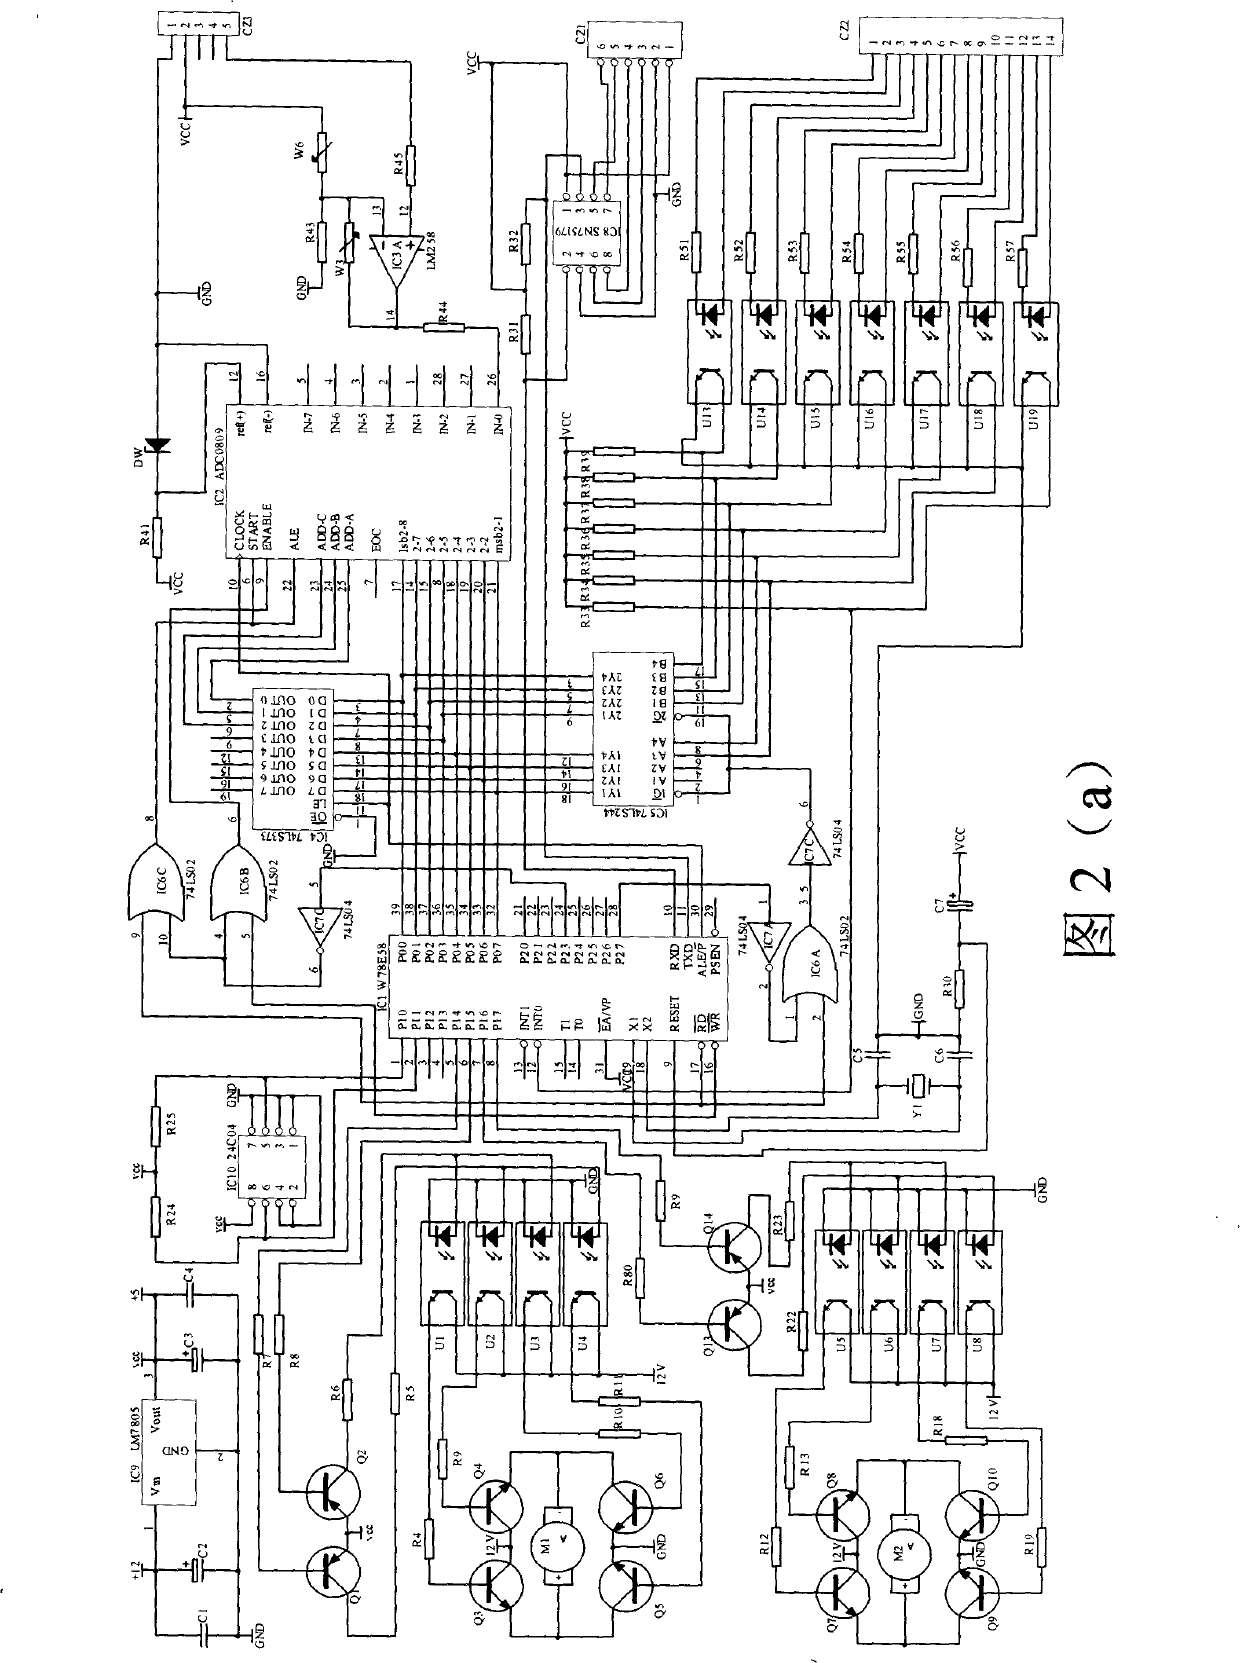 Clutch gearshift intelligent controlling system and method for motorcycle